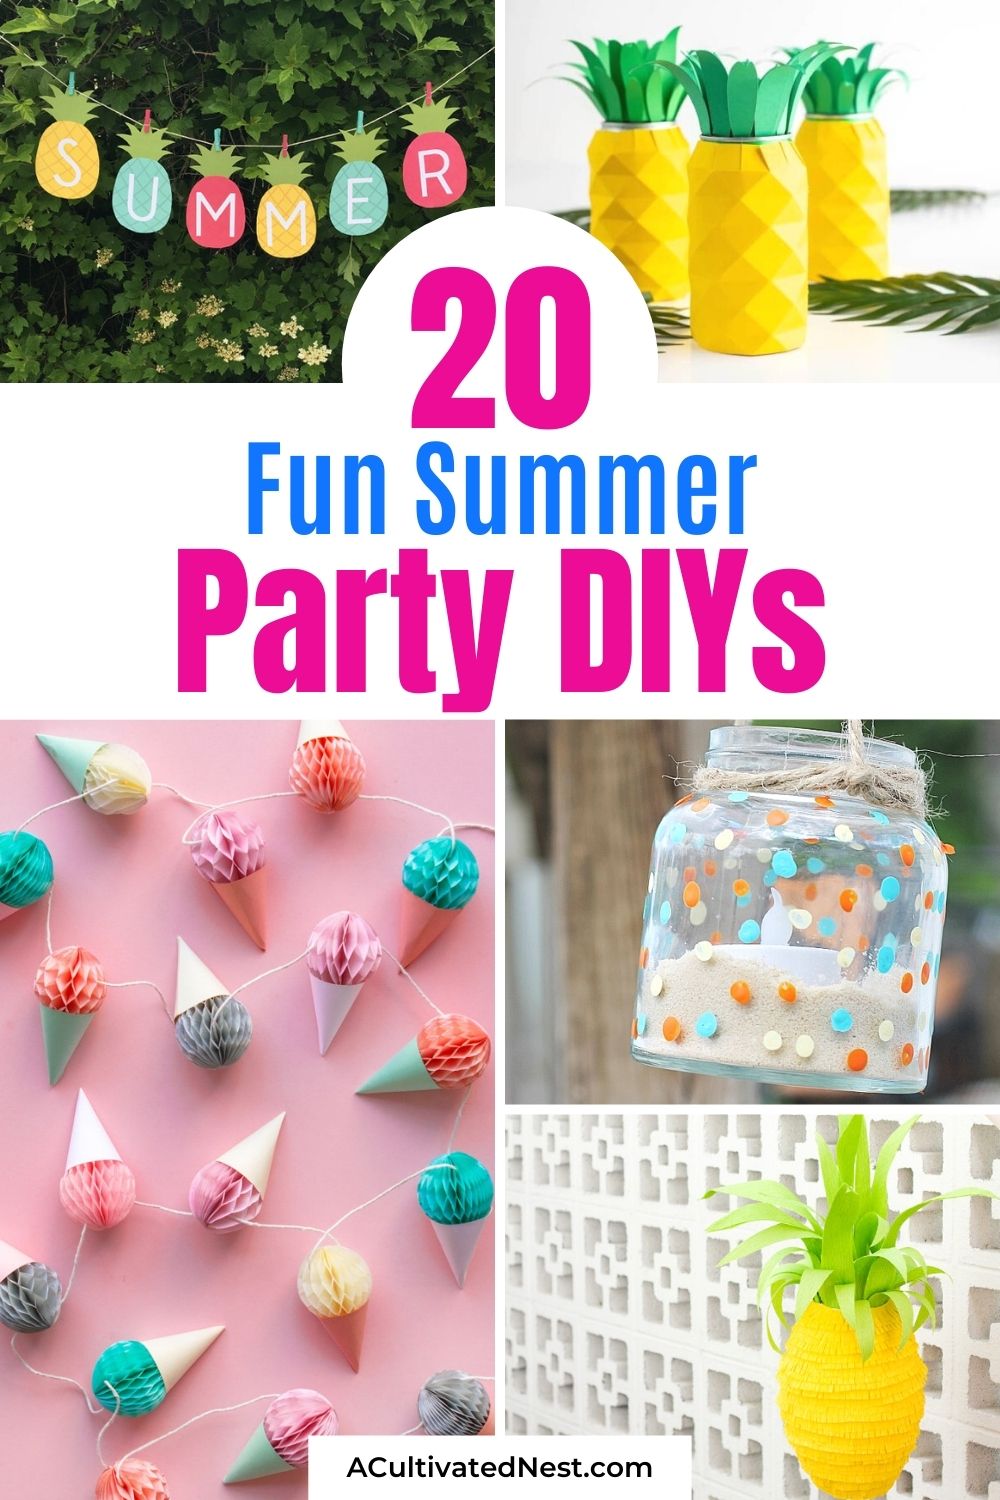 20 Fun Summer Party DIYs- Make your summer parties extra festive with these 20 easy summer party DIYs! They're the perfect way to have a fun summer party on a budget! | #summerDIY #partyDIY #diy #summerCrafts #ACultivatedNest